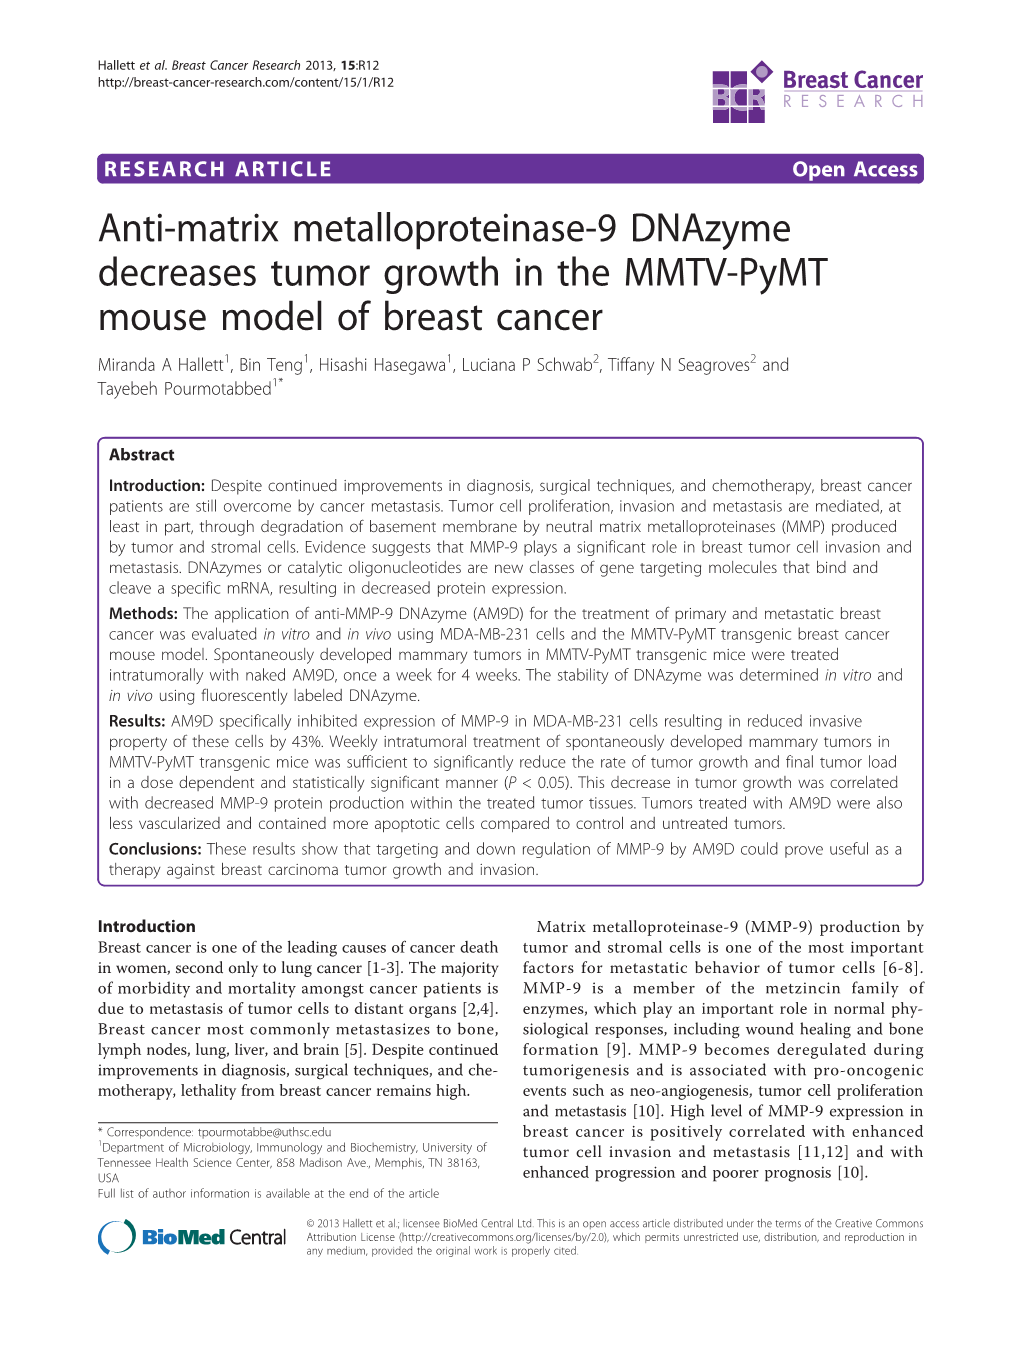 Anti-Matrix Metalloproteinase-9 Dnazyme Decreases Tumor Growth in the MMTV-Pymt Mouse Model of Breast Cancer